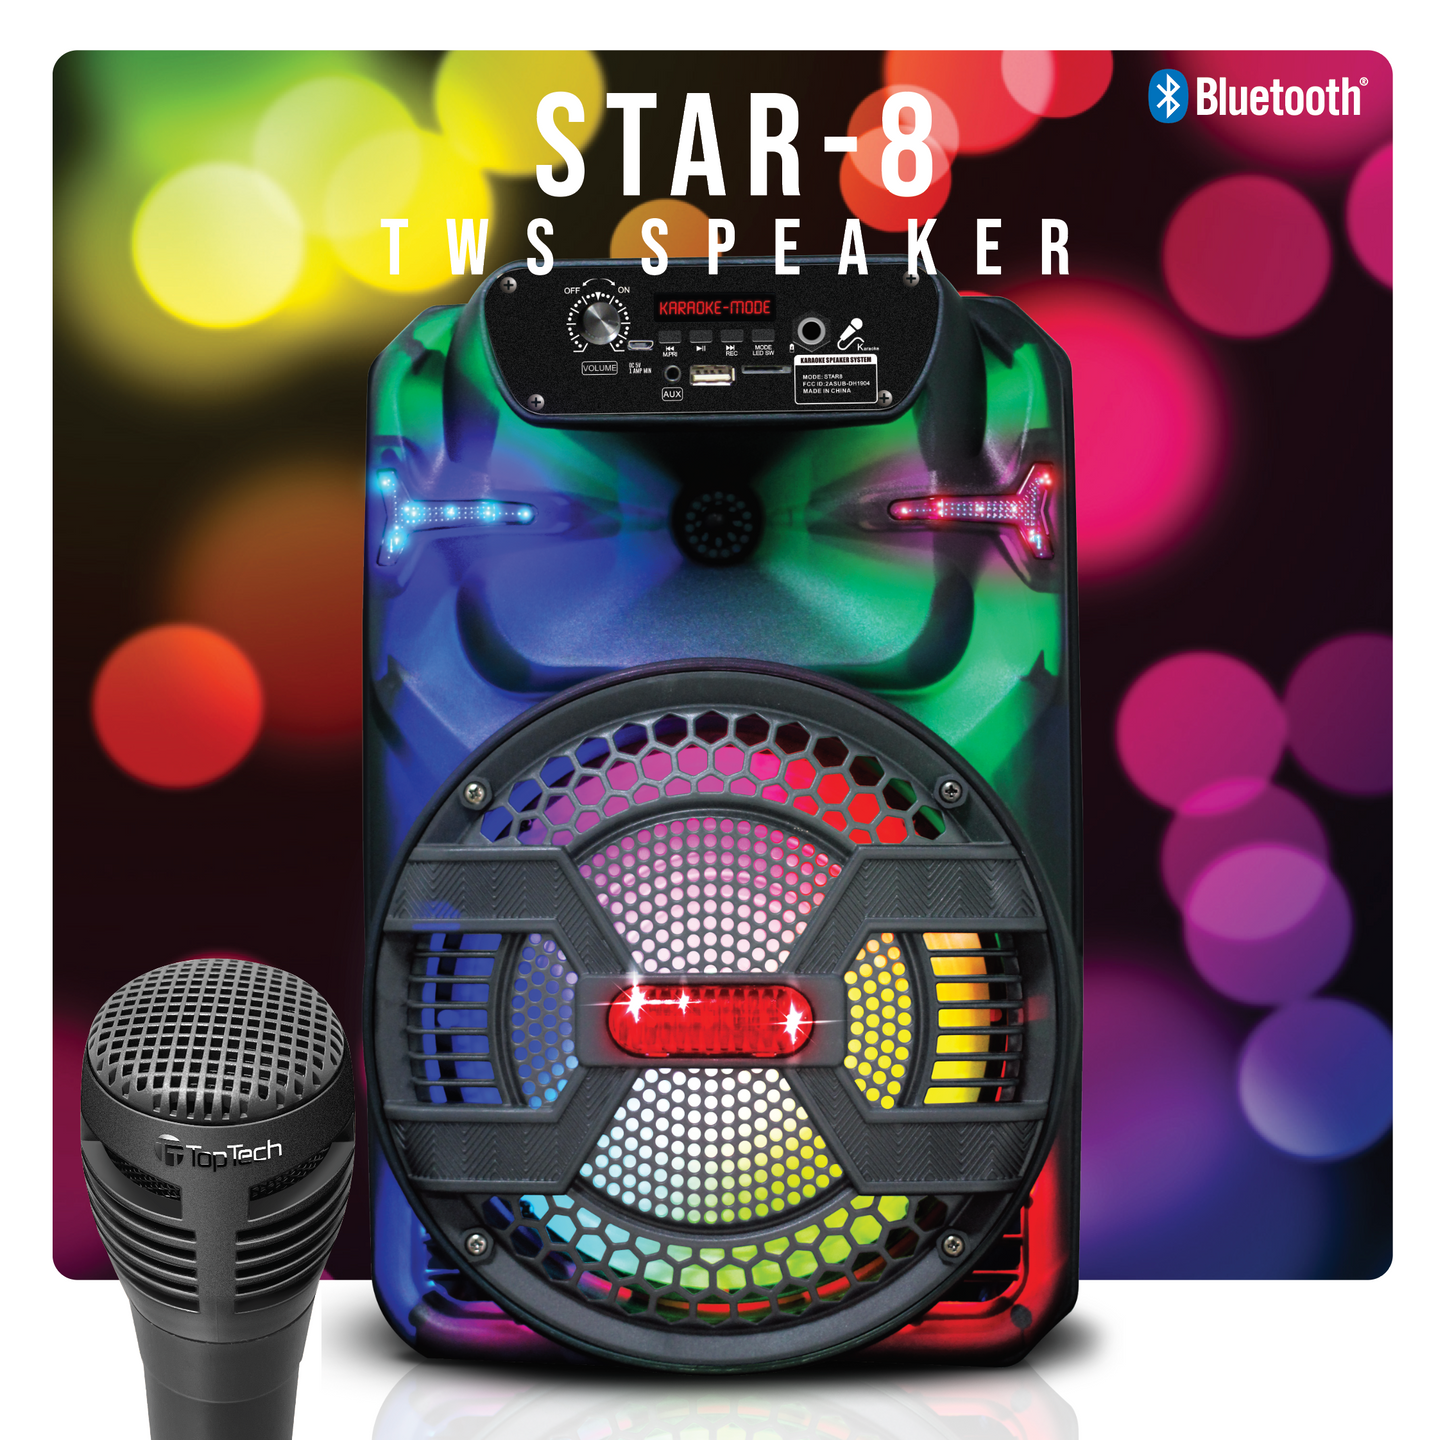 TOPTECH STAR-8, 8 Inch Portable  Bluetooth Party Speaker with Flame Lights,of Blazing Powerful Sound,Unparalleled Stereo Sound, 10M (33ft) Wireless Range,for Mic/USB/TF Card/Aux/FM Radio/Remote Control